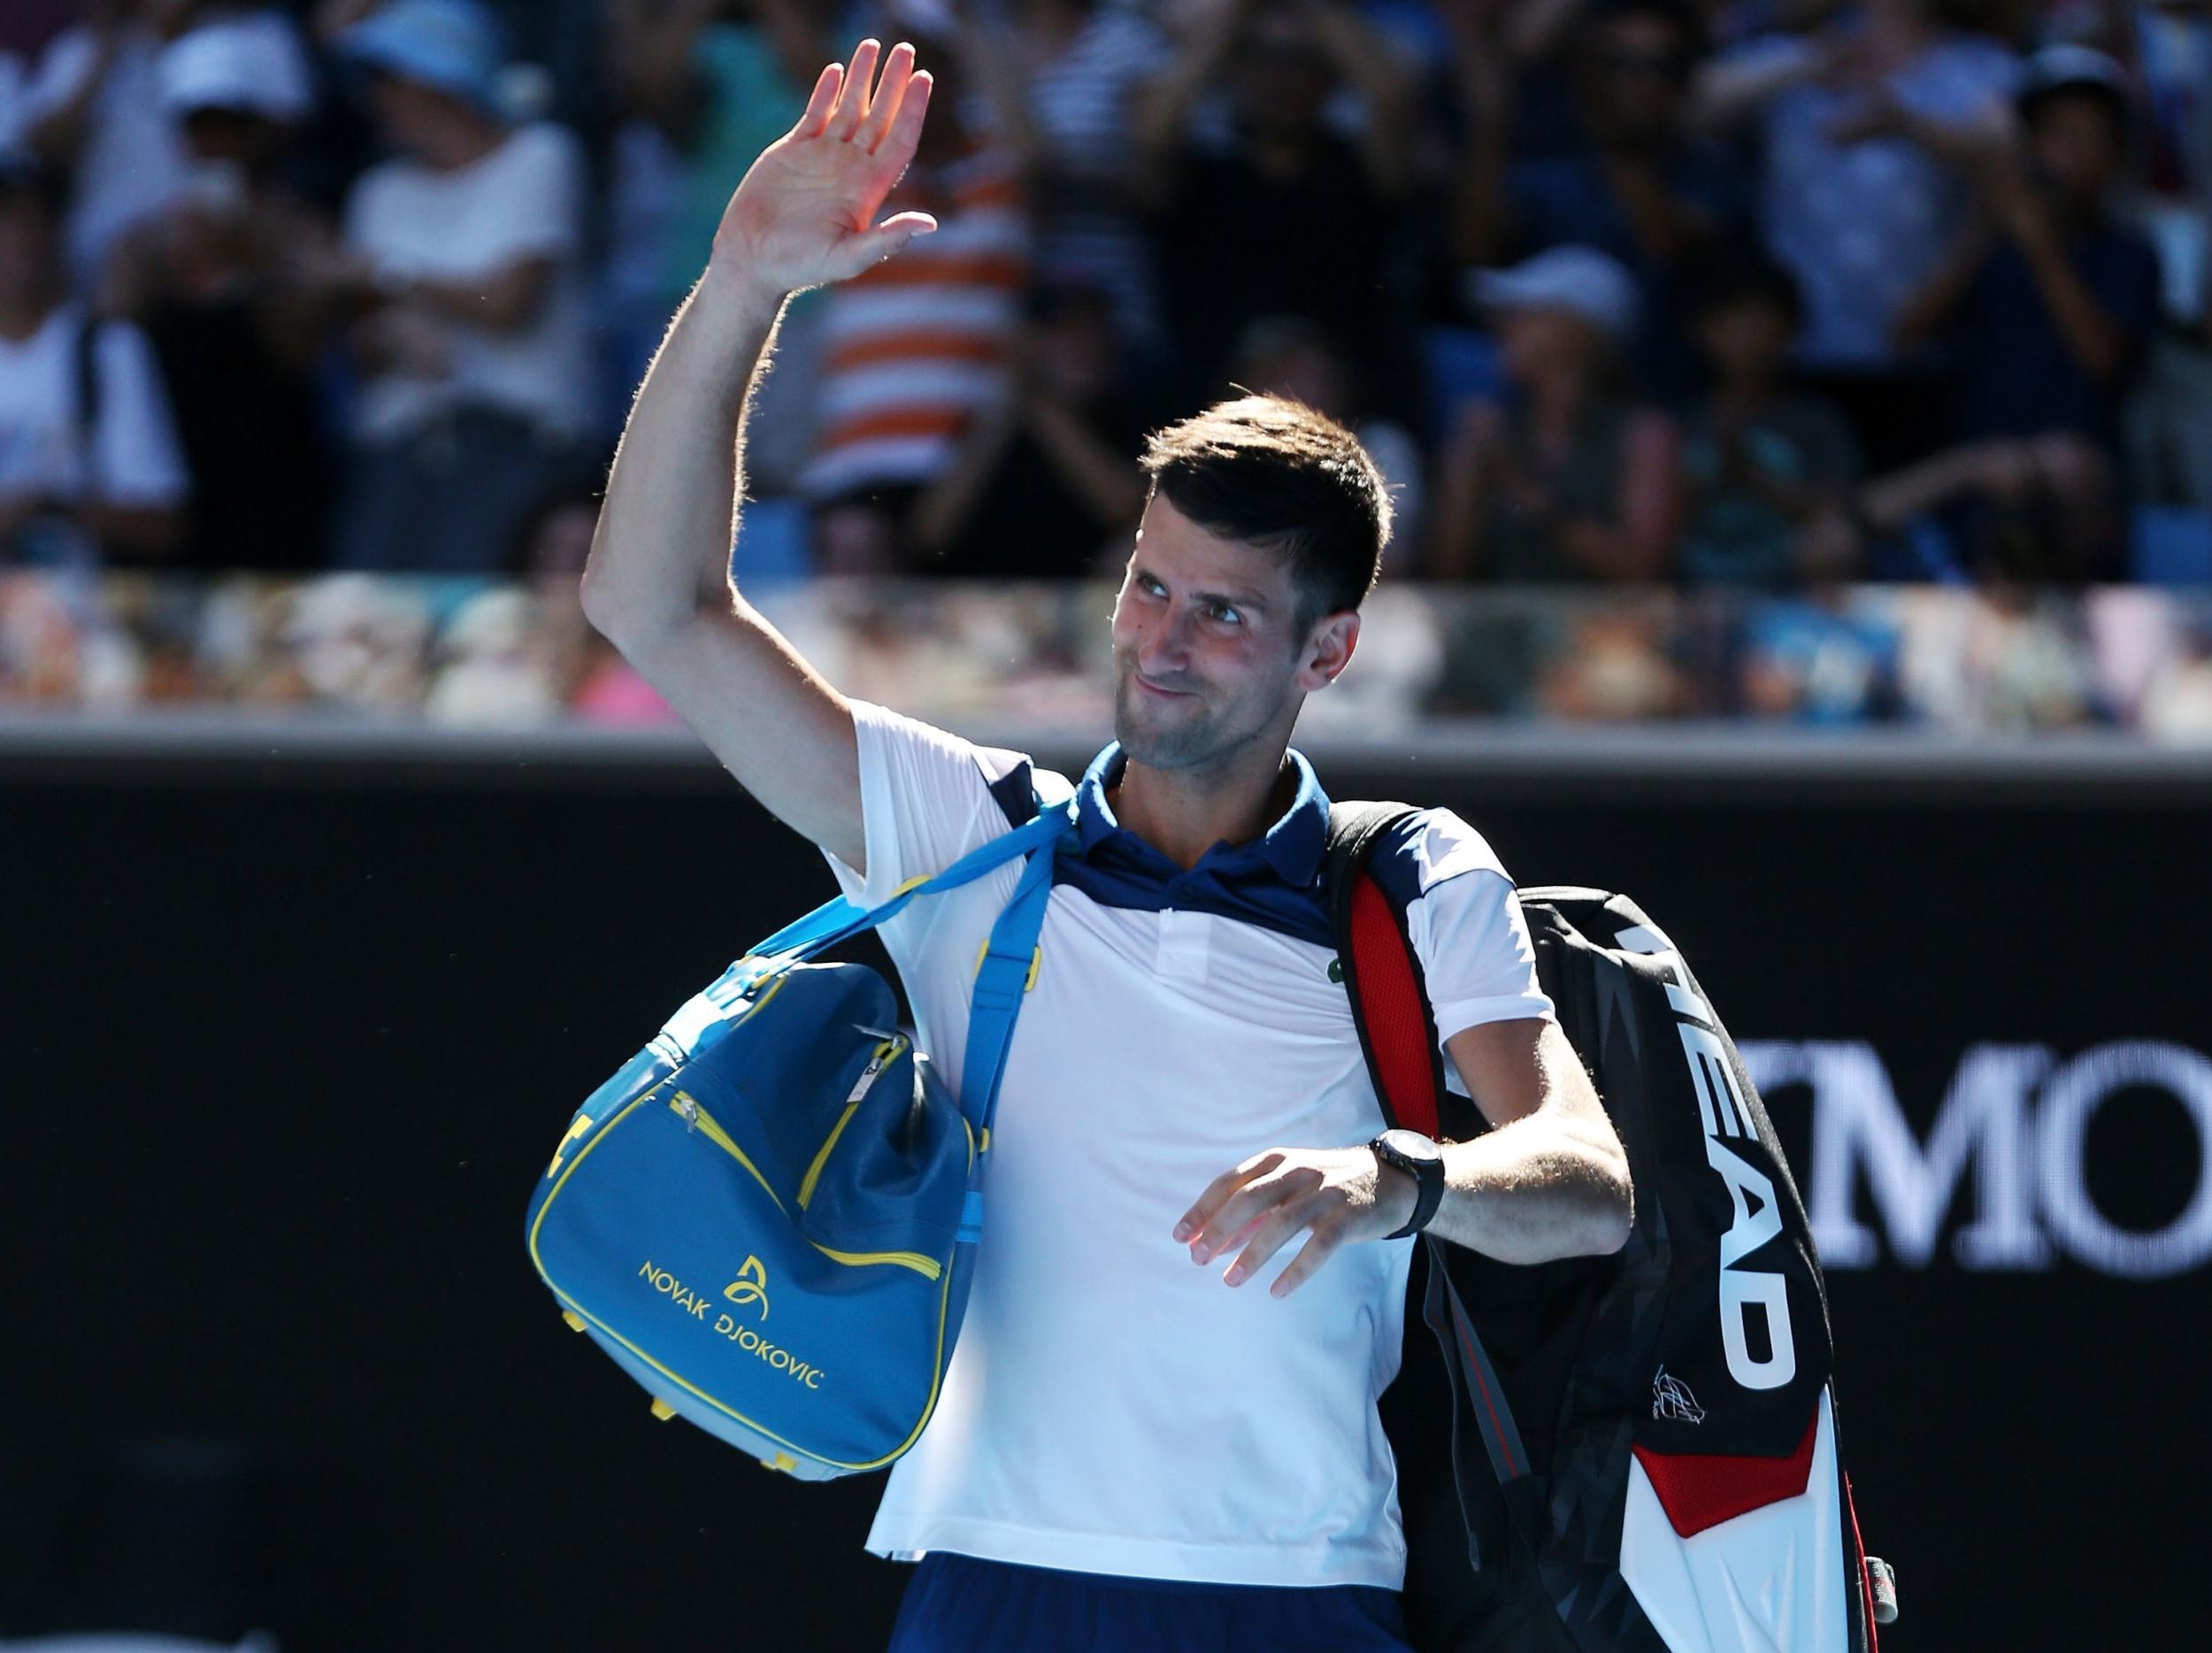 Djokovic won his first competitive match since last summer